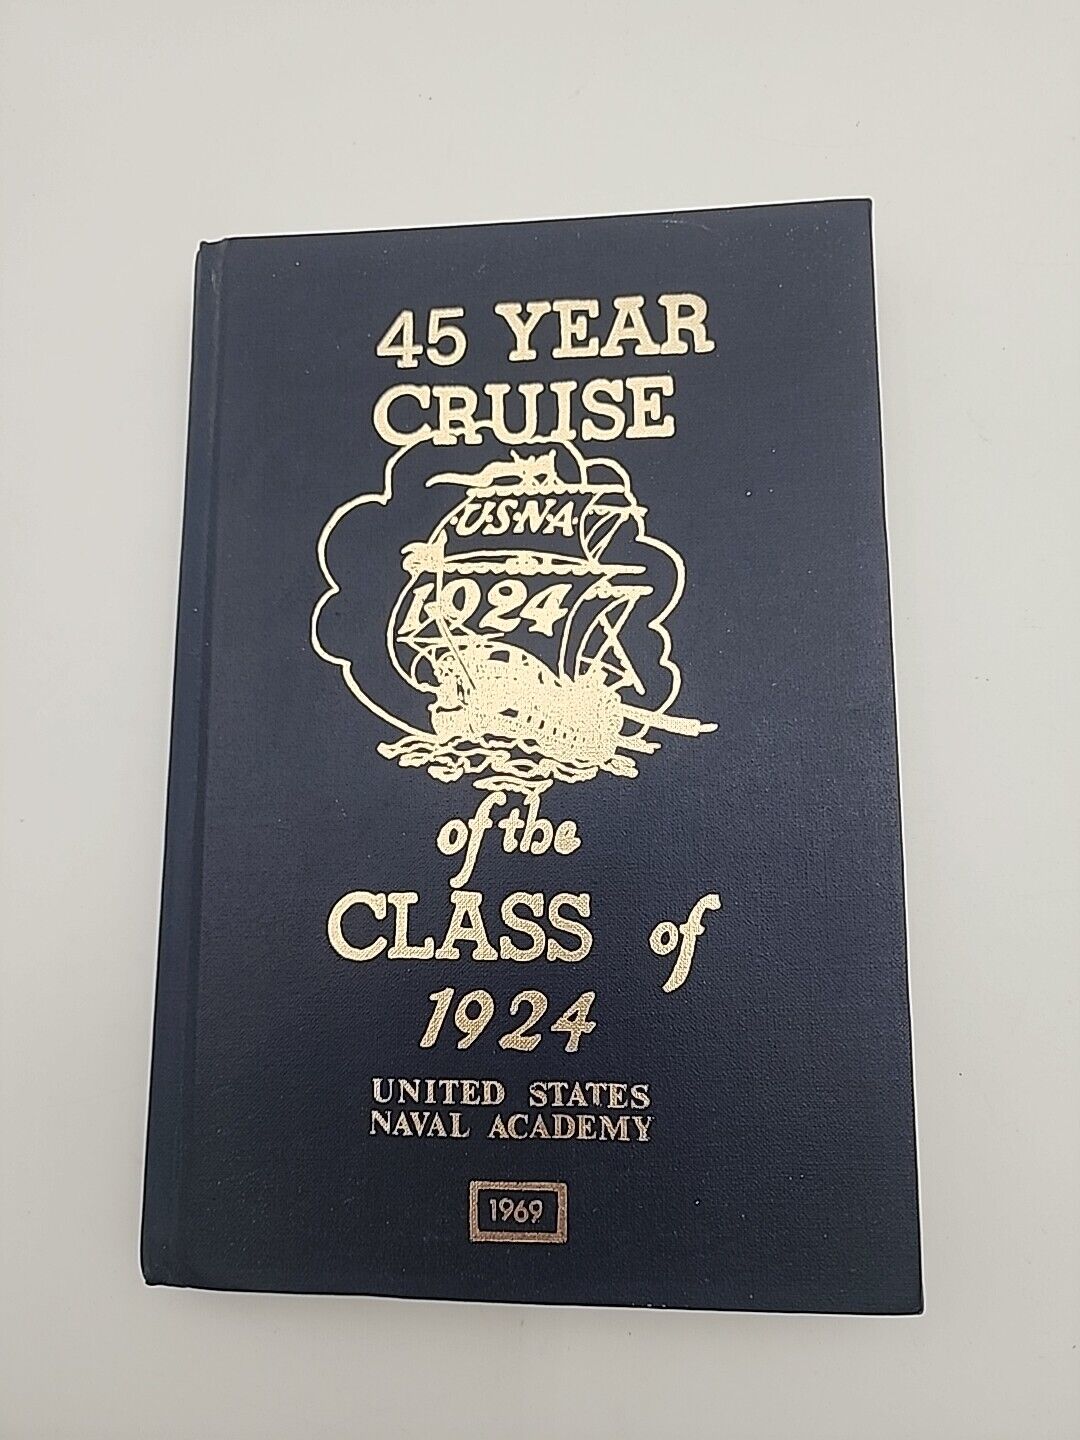 1969 update of the Class of 1924 US Naval Academy - 45 year cruise